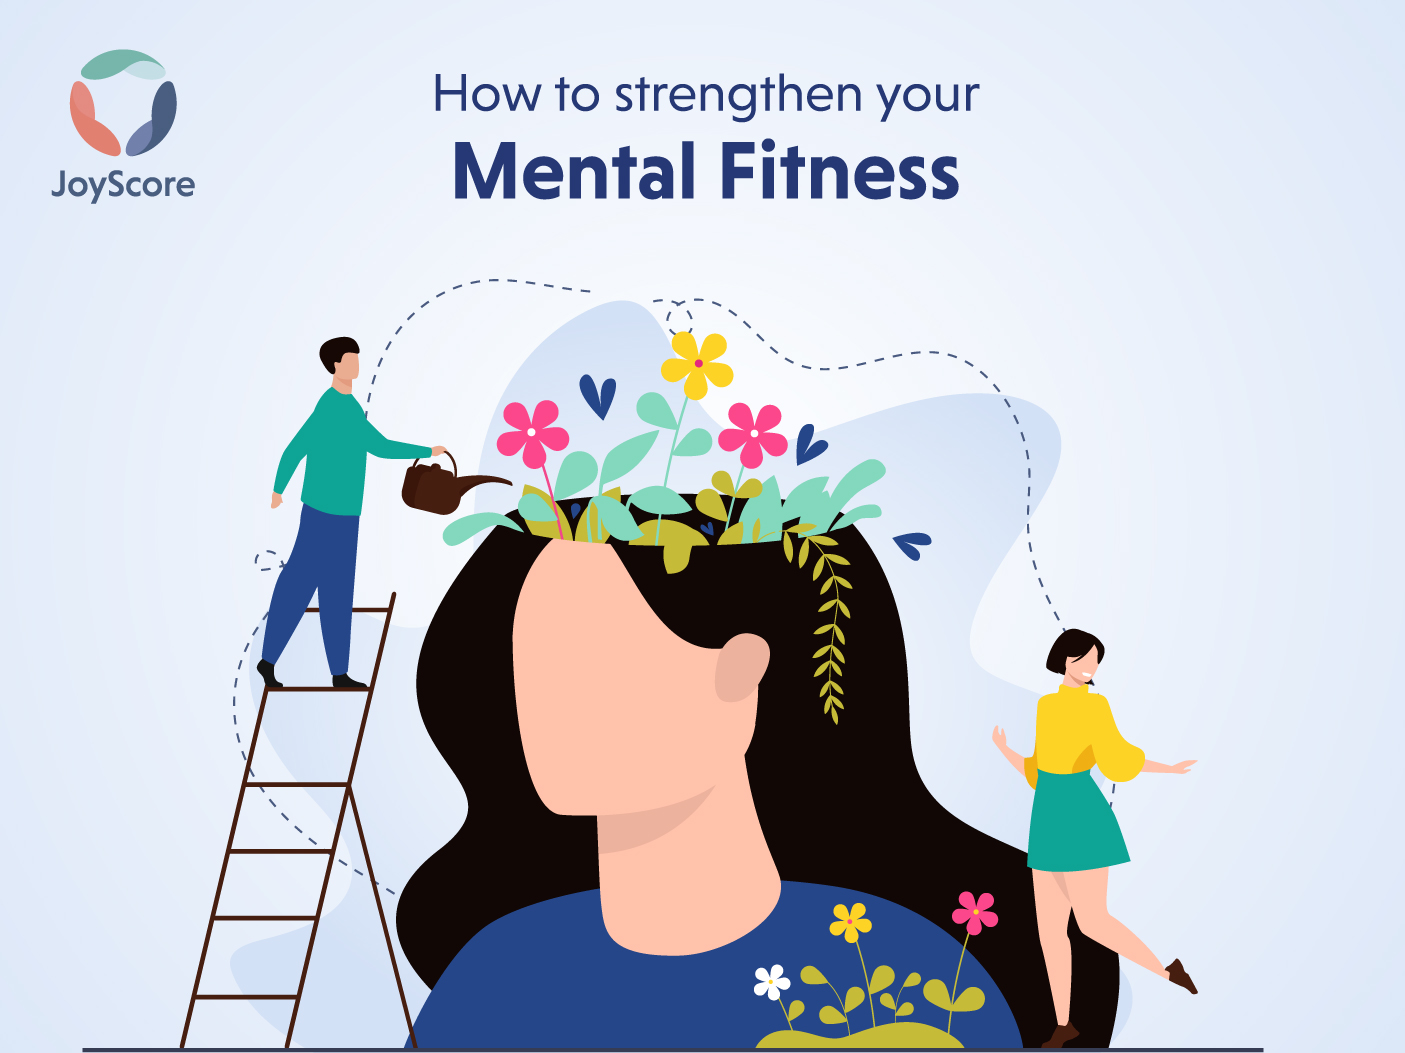 How To Strengthen Your Mental Fitness And Why Should We Do It?